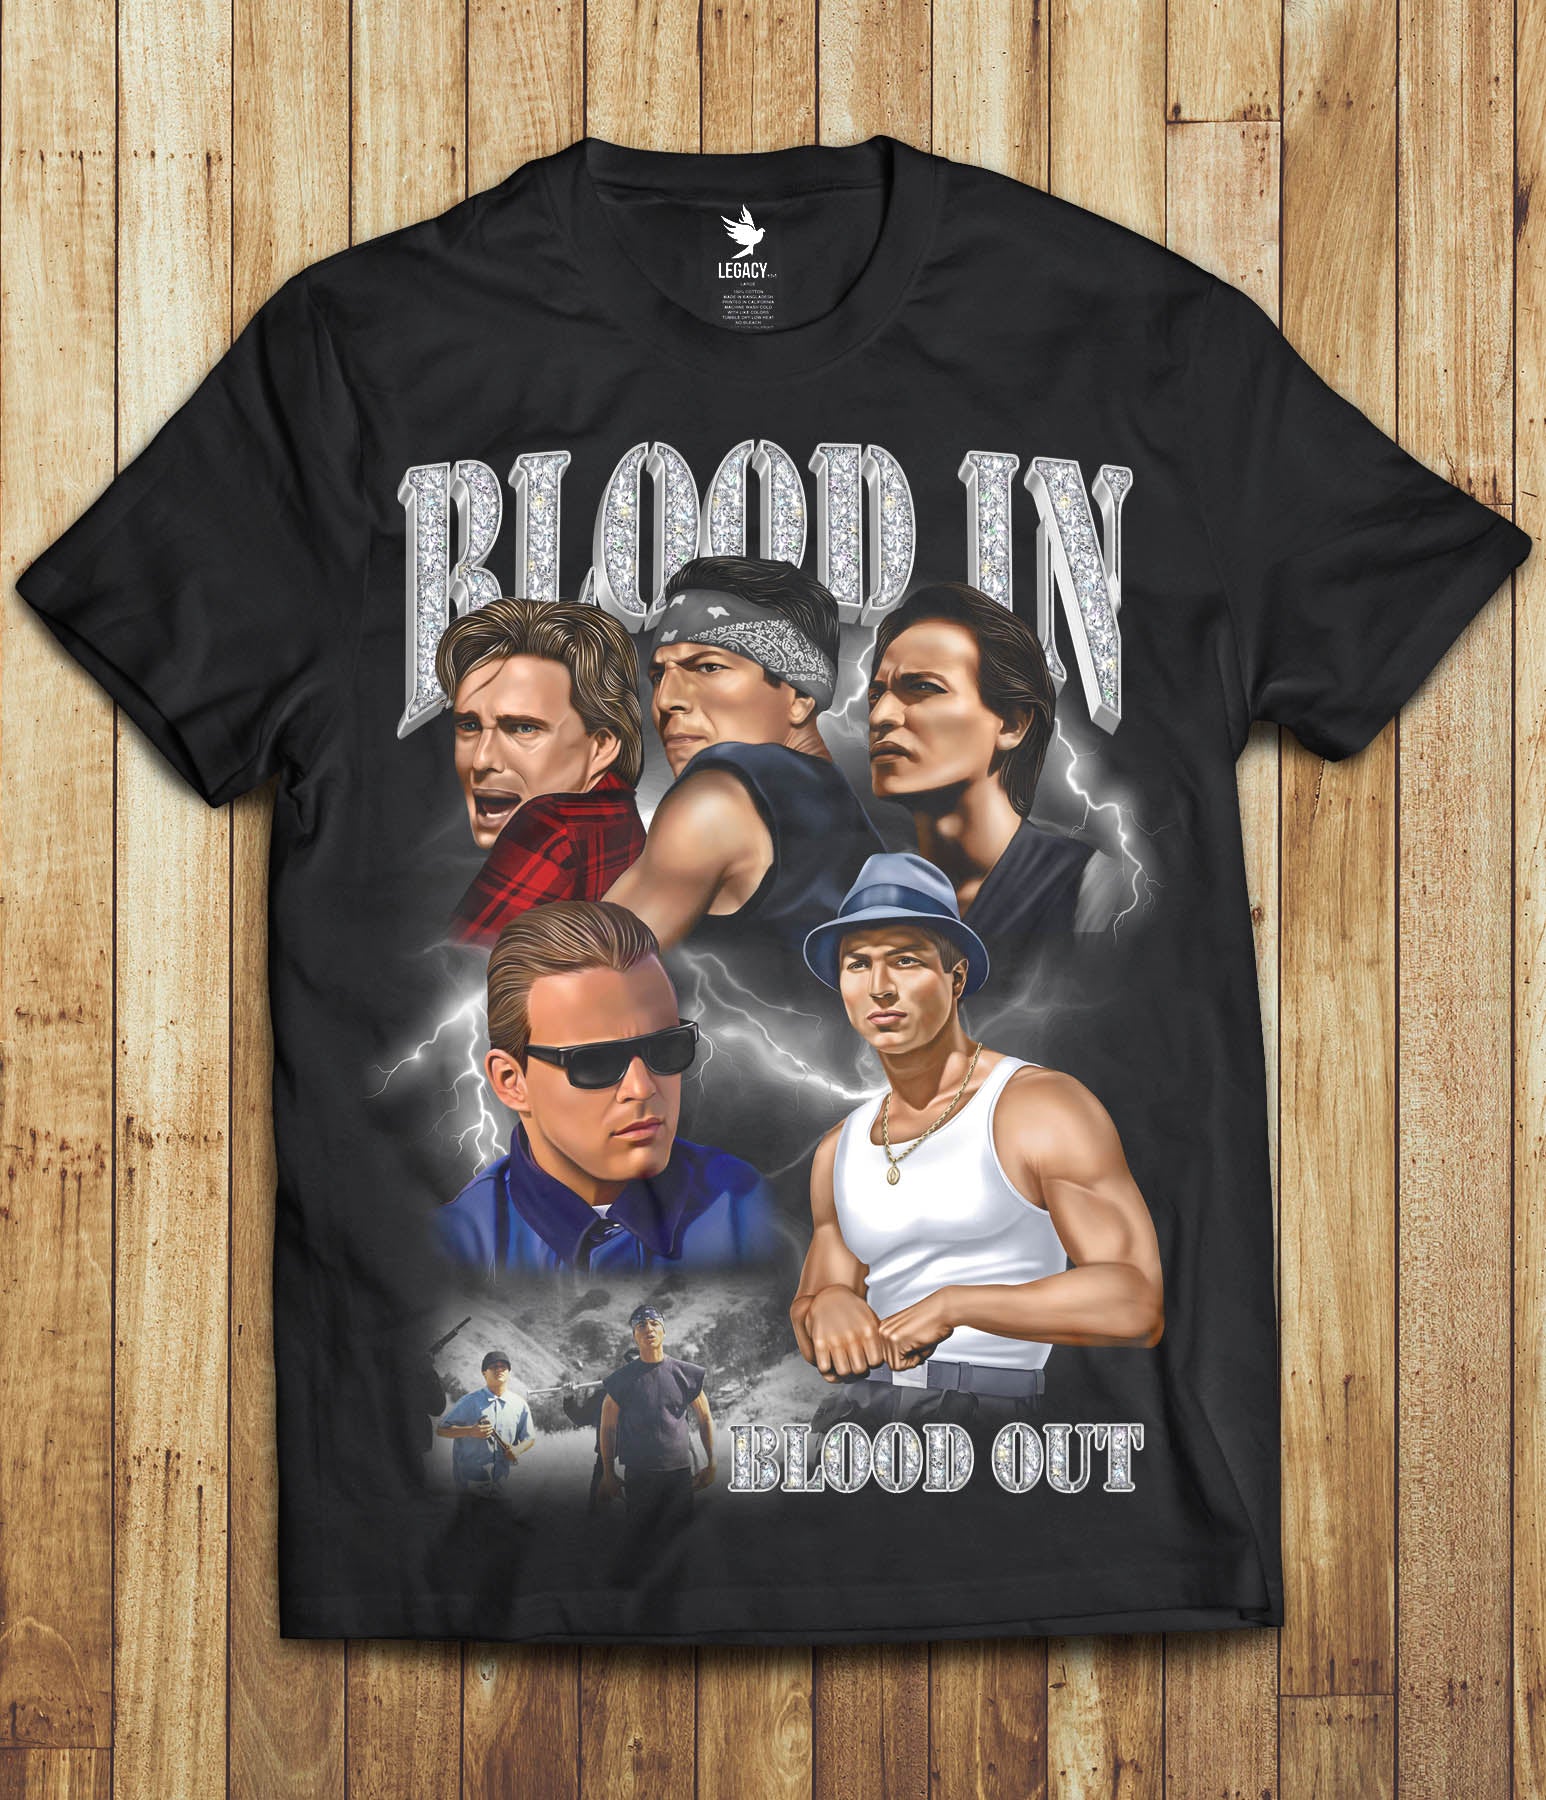 Blood in Blood out